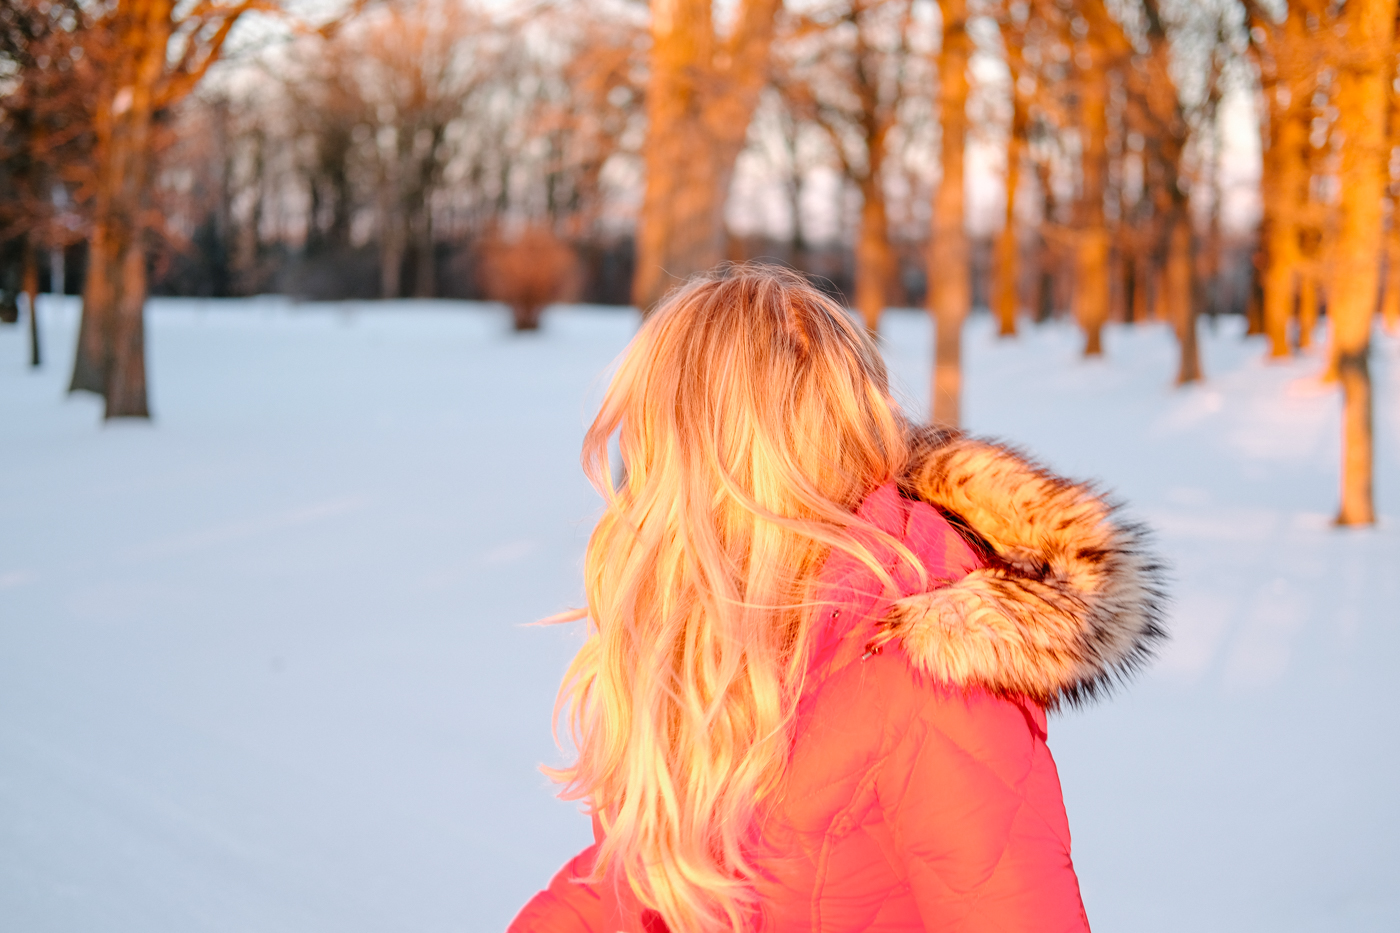 Debora Dahl in the snow with the sunset on her hair